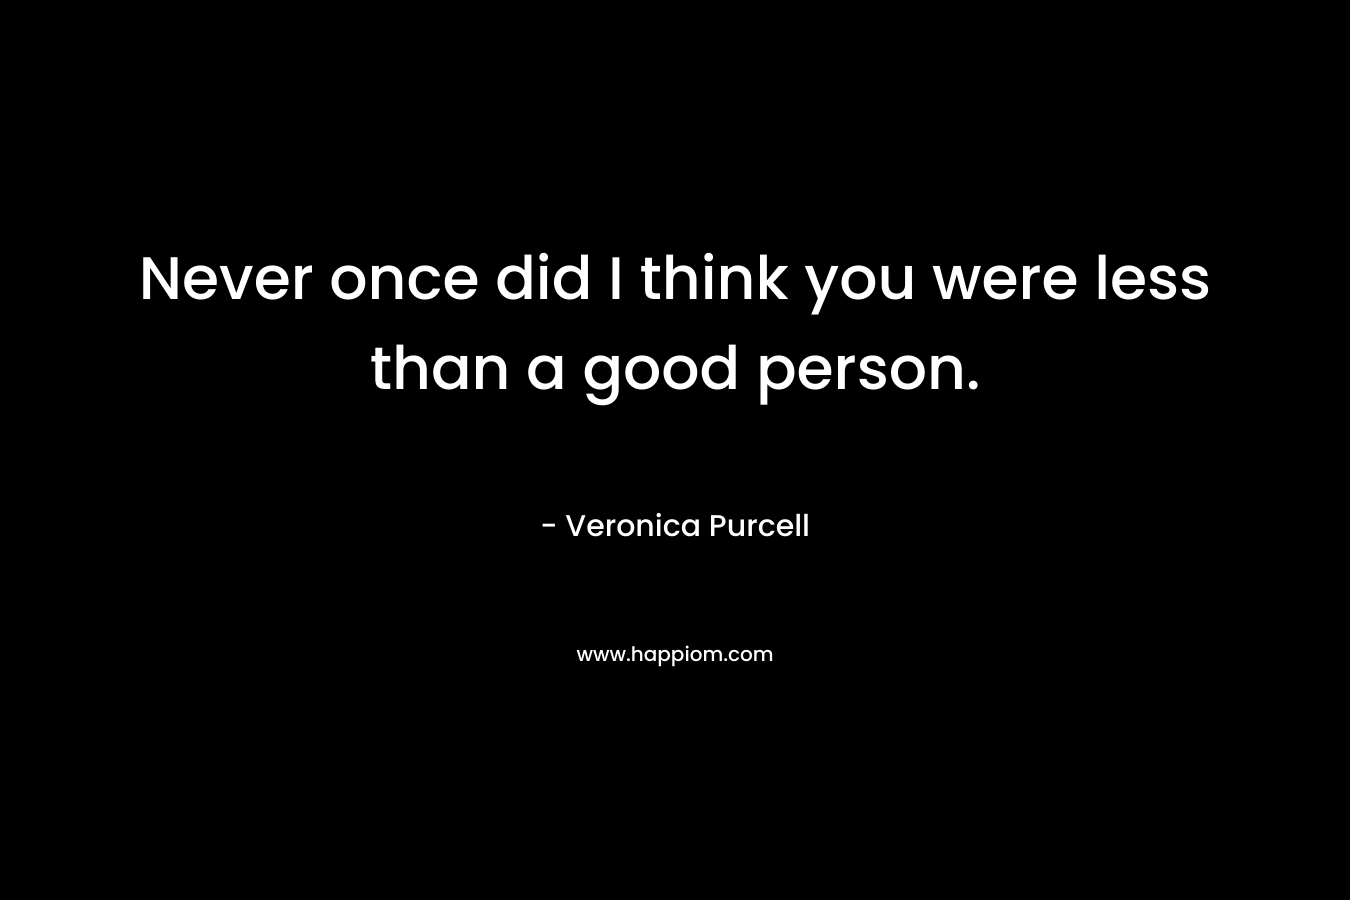 Never once did I think you were less than a good person.